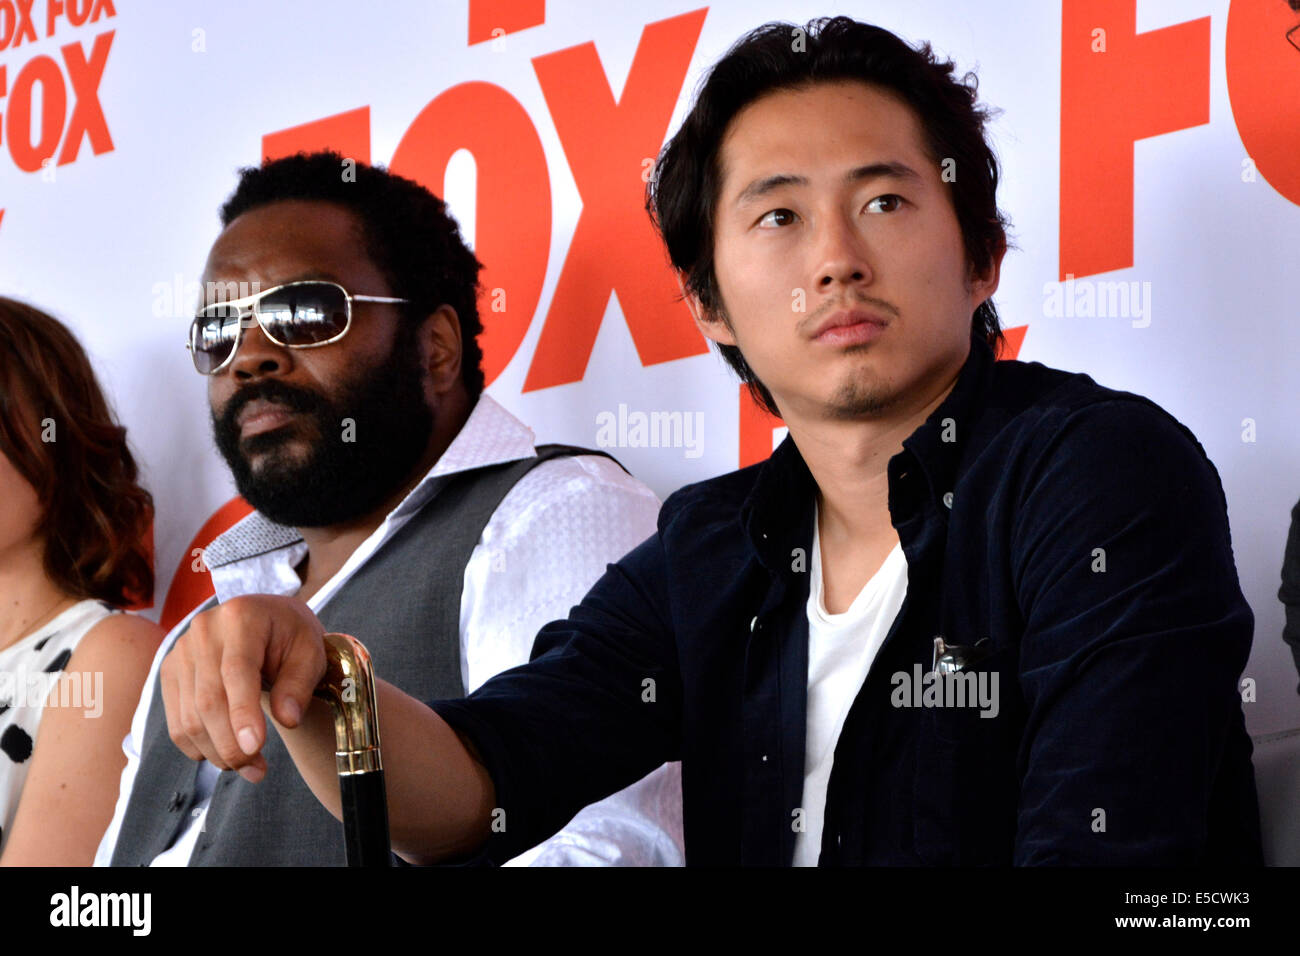 Chad L. Coleman and Steven Yeun attend the FOX Press Breakfast press conference of the series 'The Walking Dead' on July 25, 2014 at the roof lounge of the Andaz Hotel in San Diego during the San Diego Comic-Con International. Stock Photo